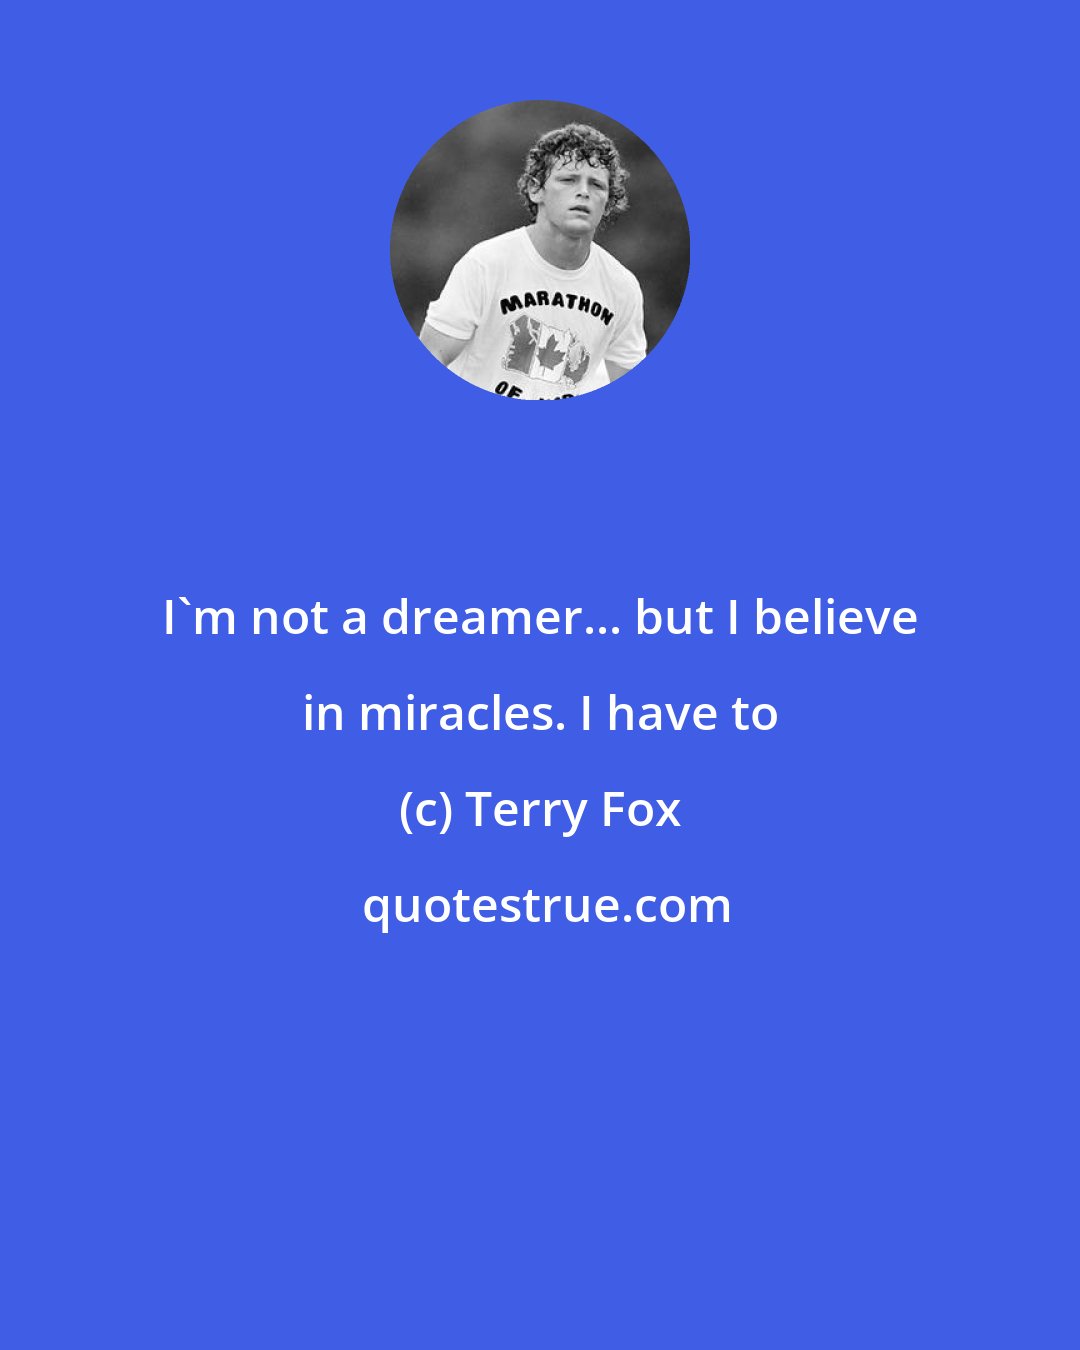 Terry Fox: I'm not a dreamer... but I believe in miracles. I have to